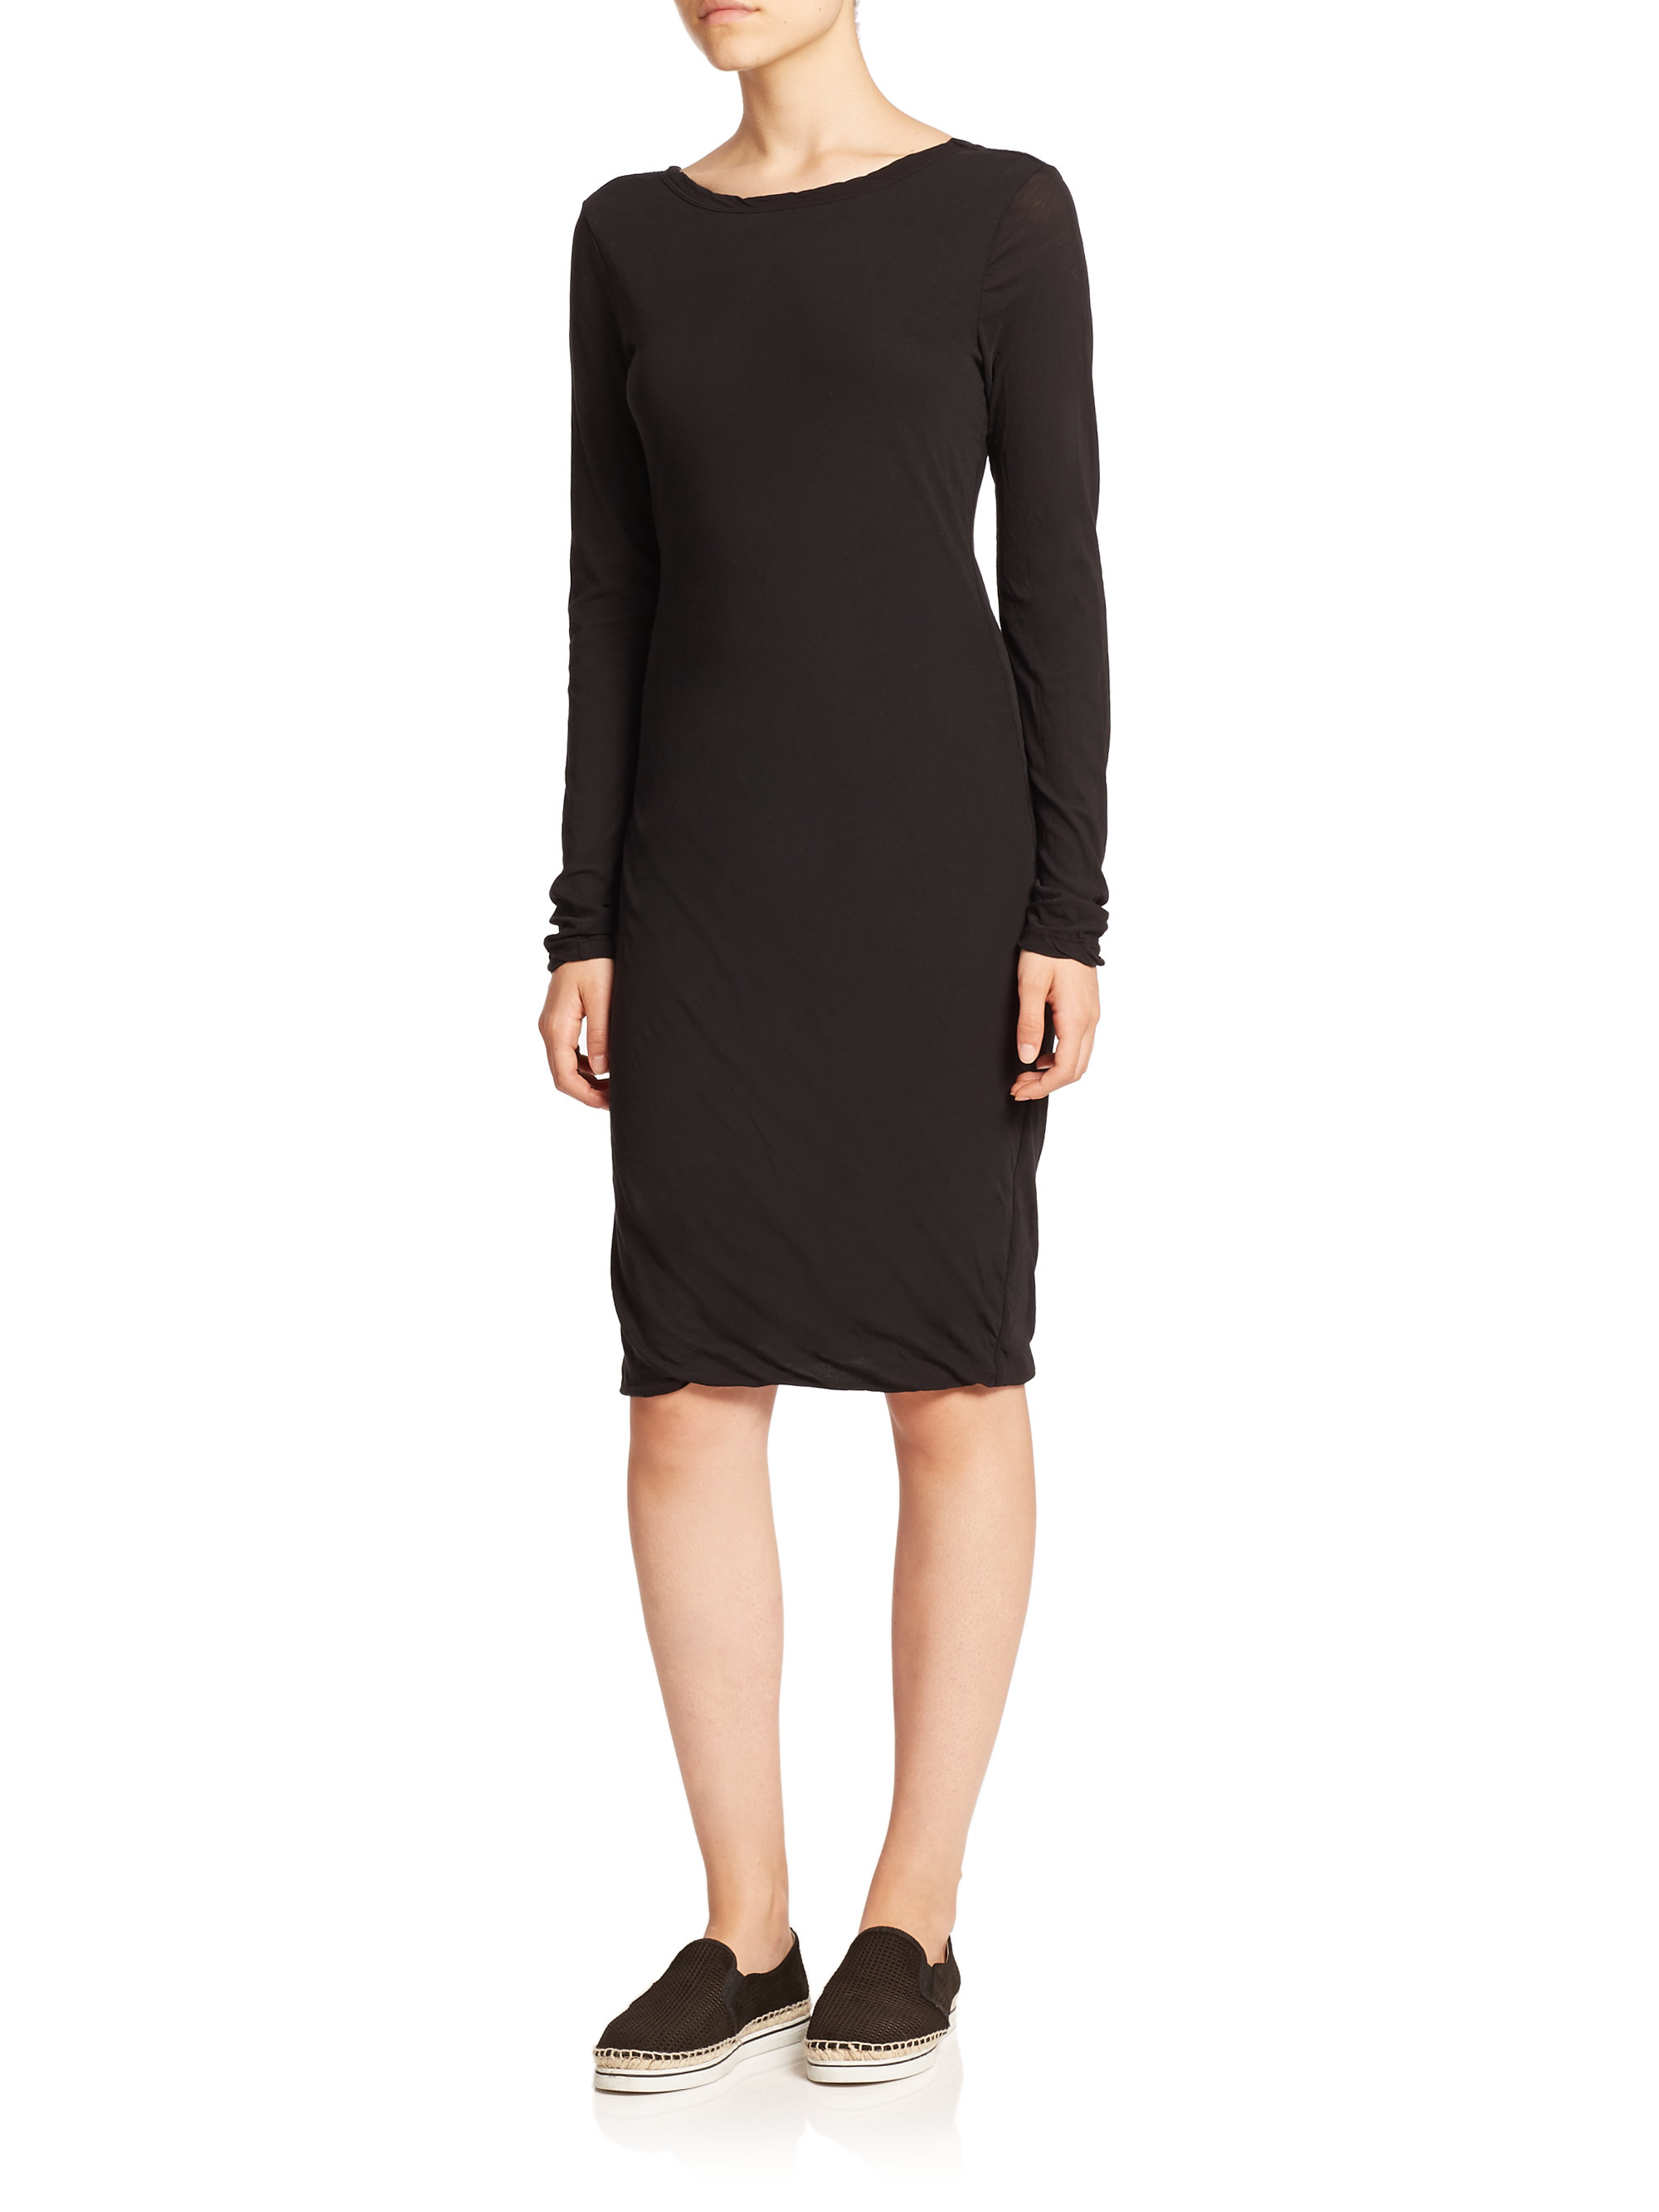 Lyst - James Perse Skinny Scoopback Dress in Black